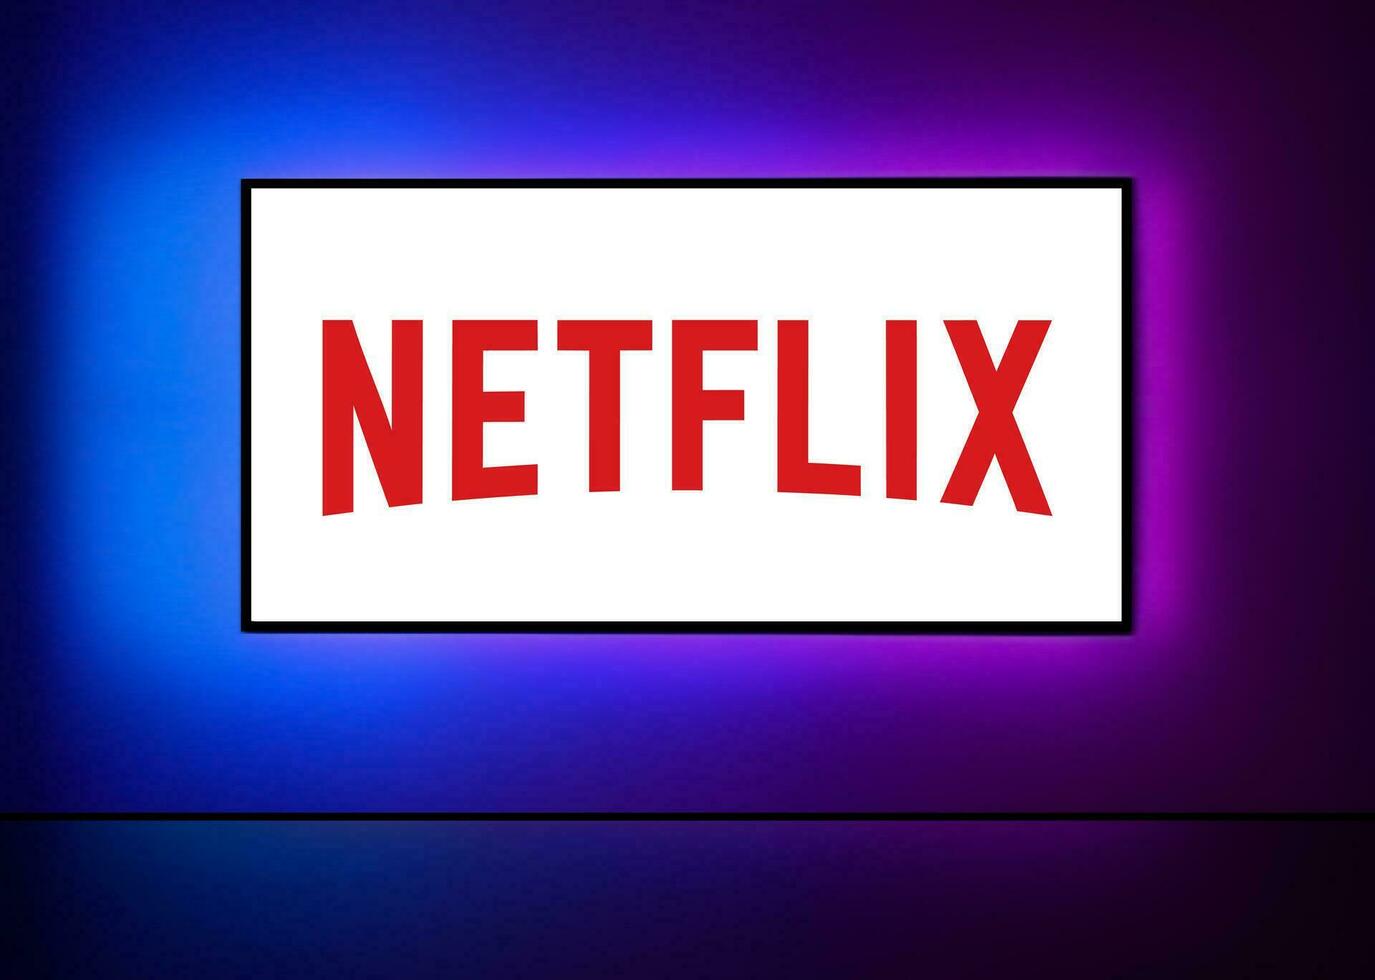 Netflix logo on the big TV screen with neon colorful background on wall. Netflix is an American entertainment company founded by Hastings and Randolph. Vector illustration